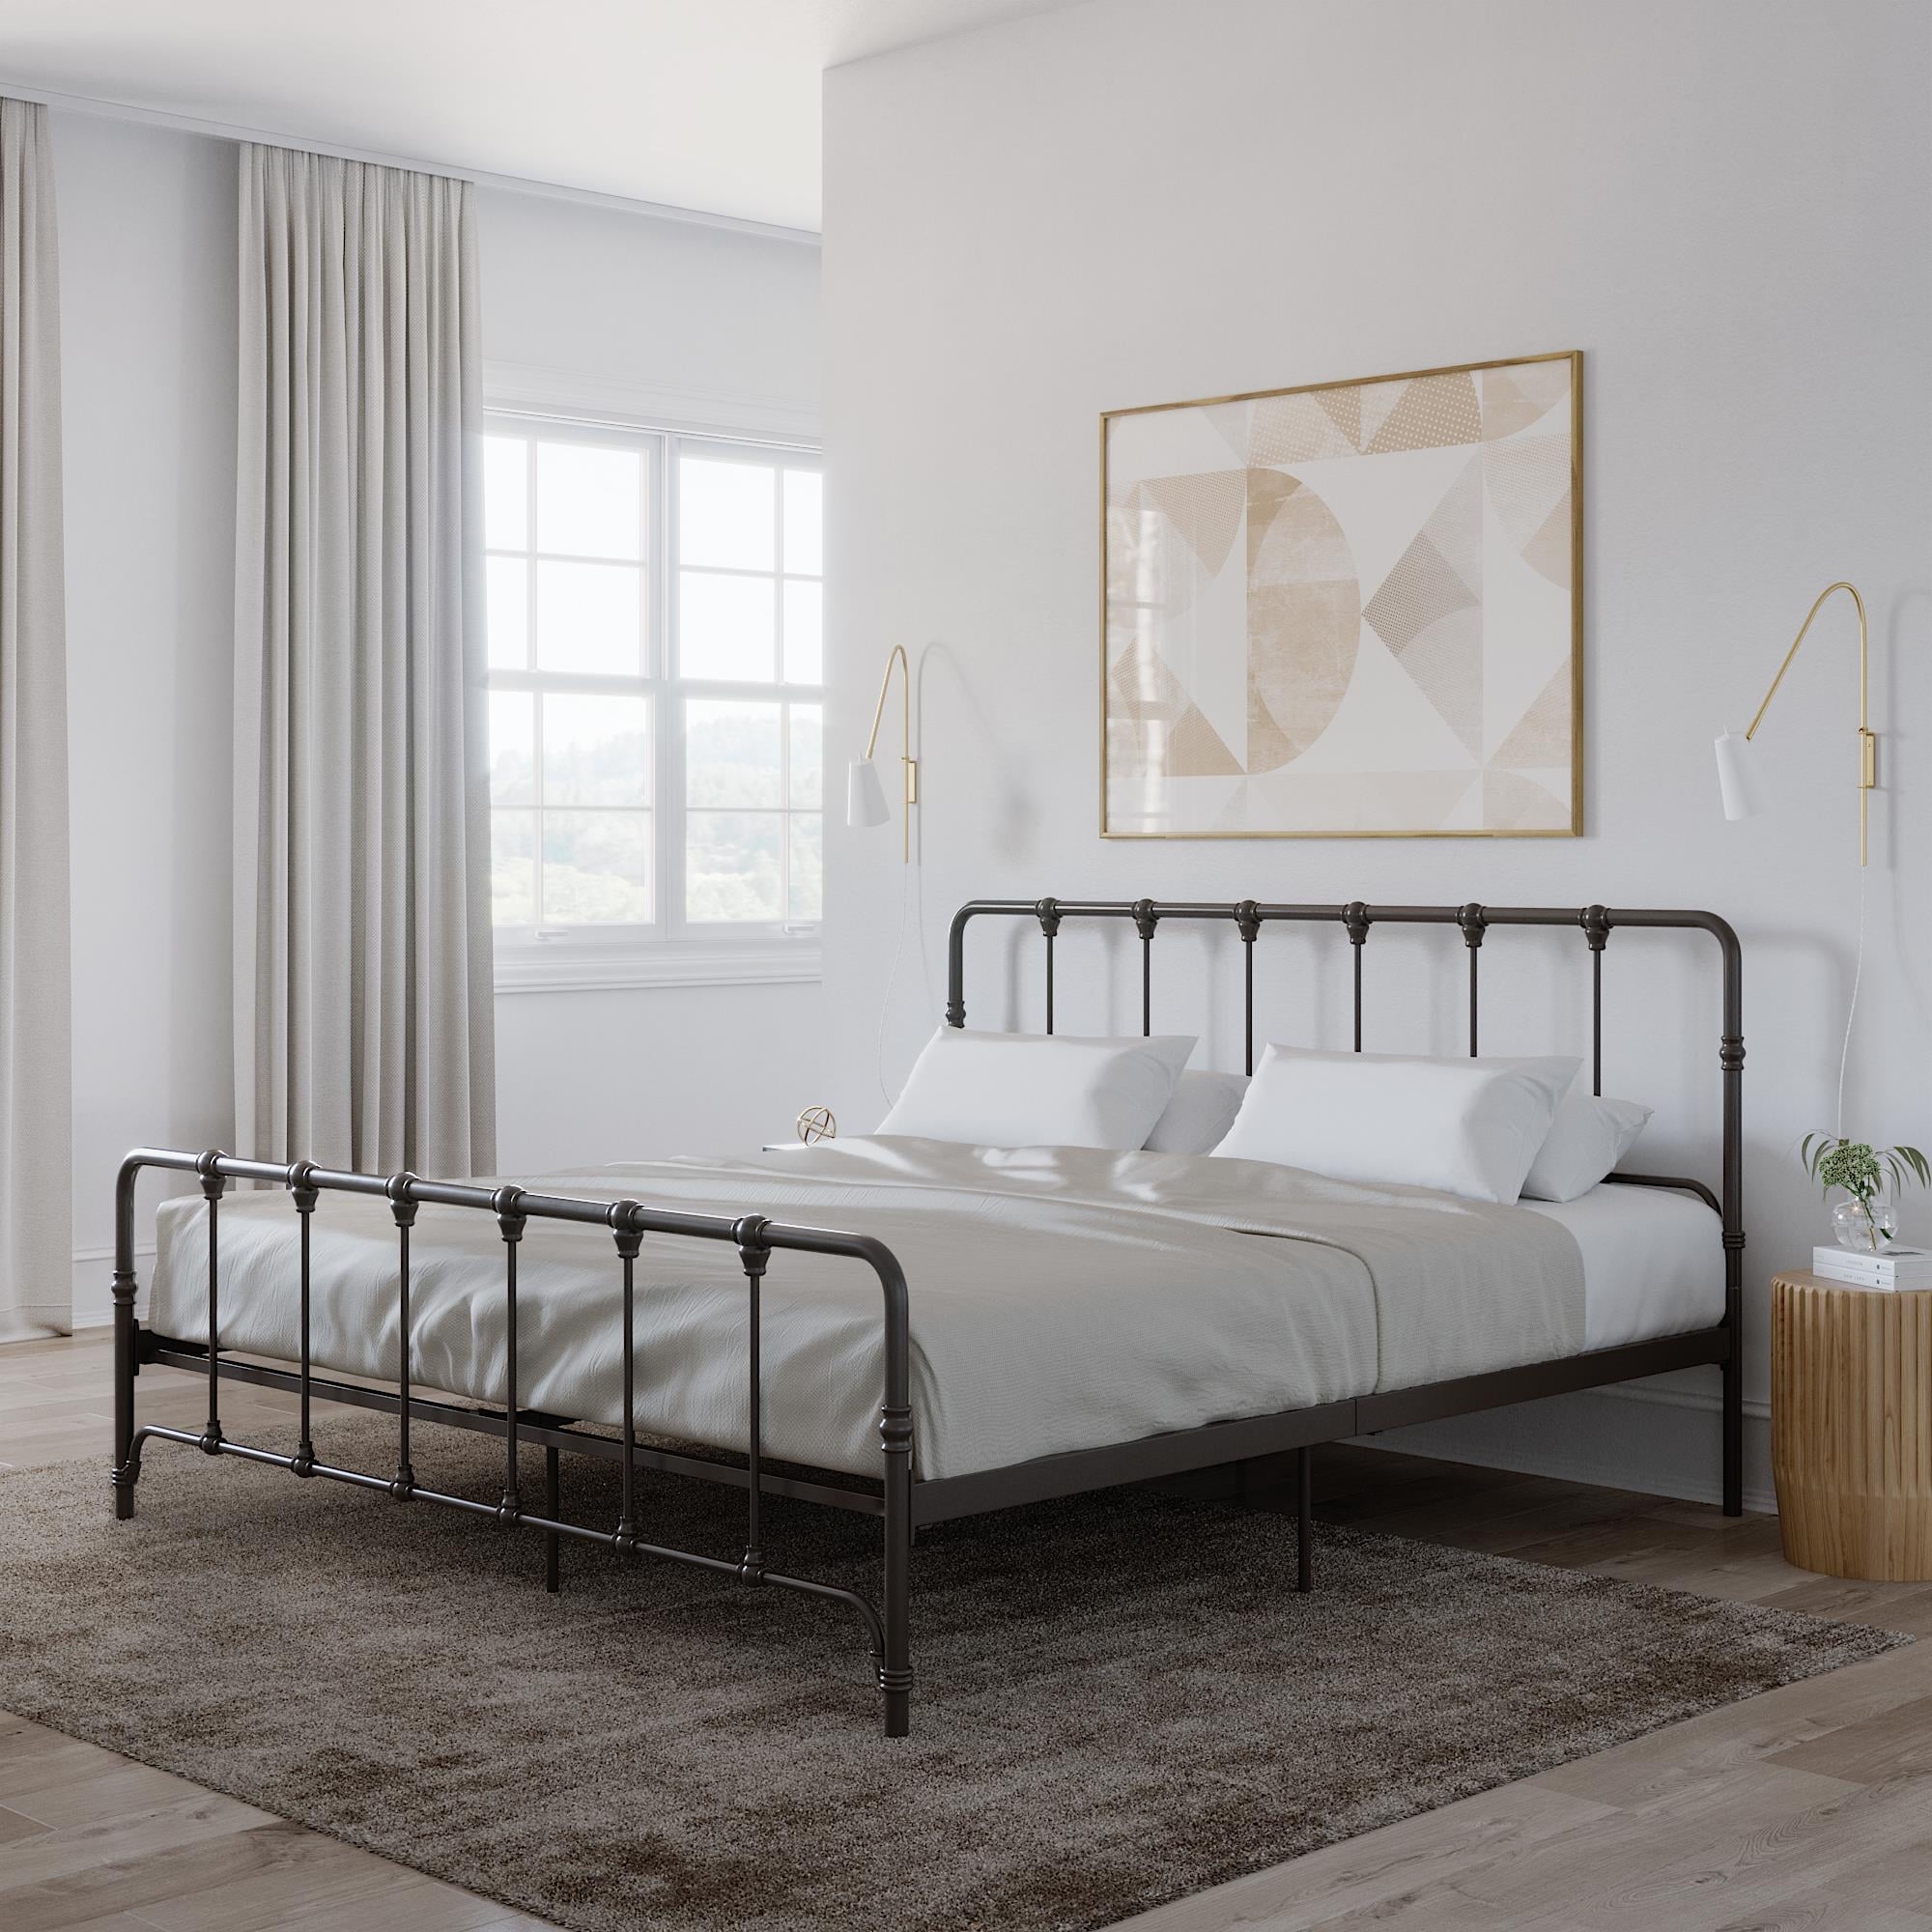 Mainstays Farmhouse Metal Bed King, Iron Bed Frame King